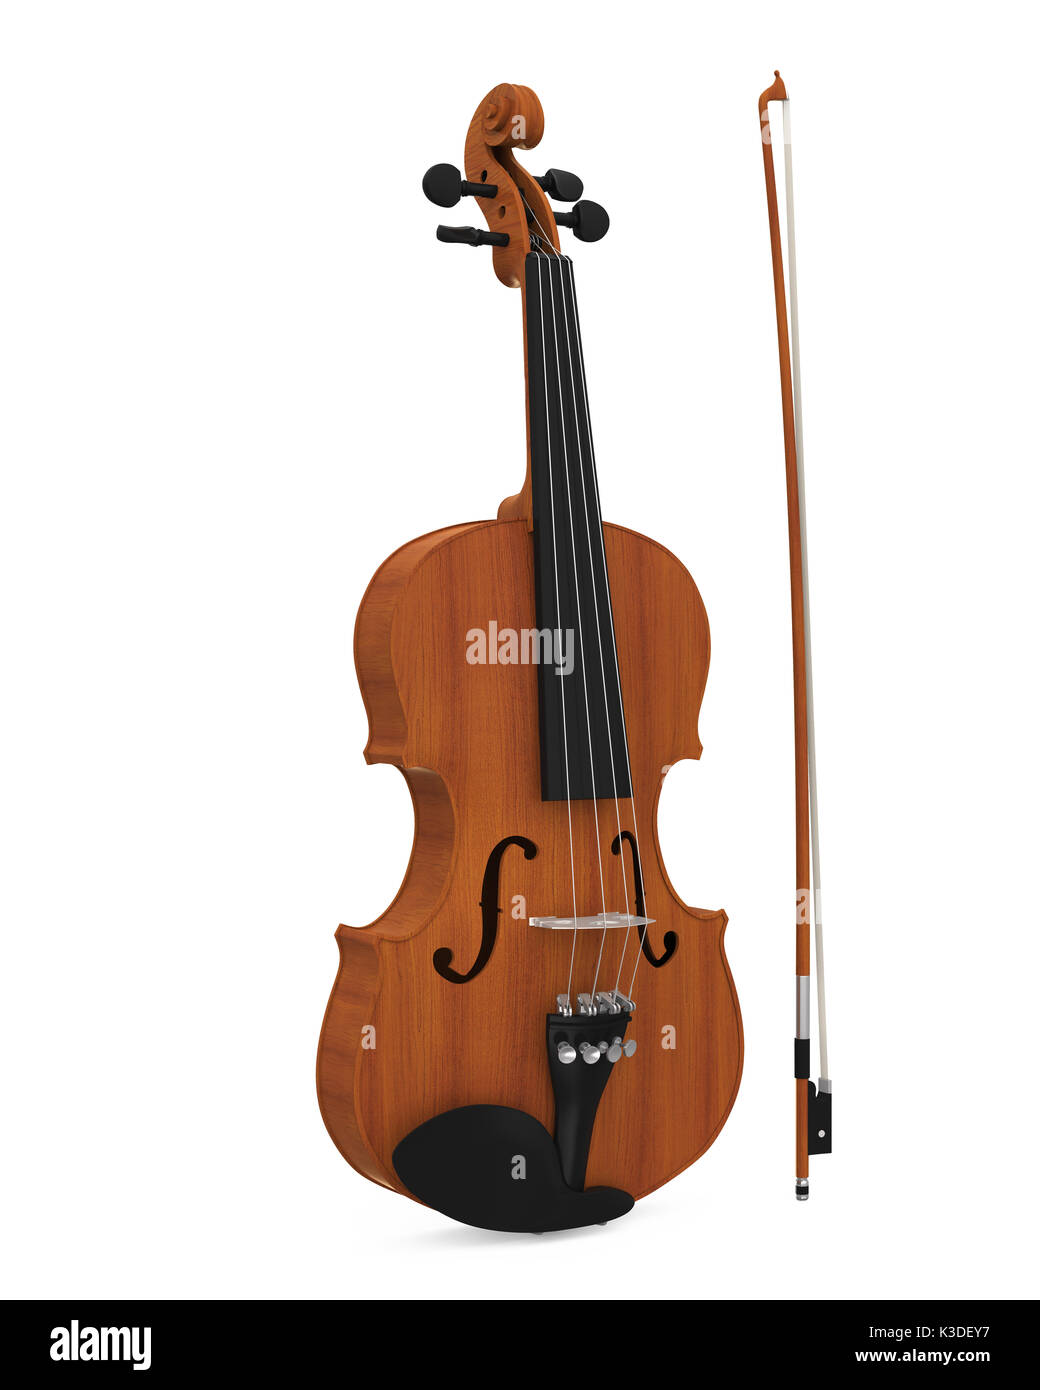 Aged Violin with Bow Isolated Stock Photo